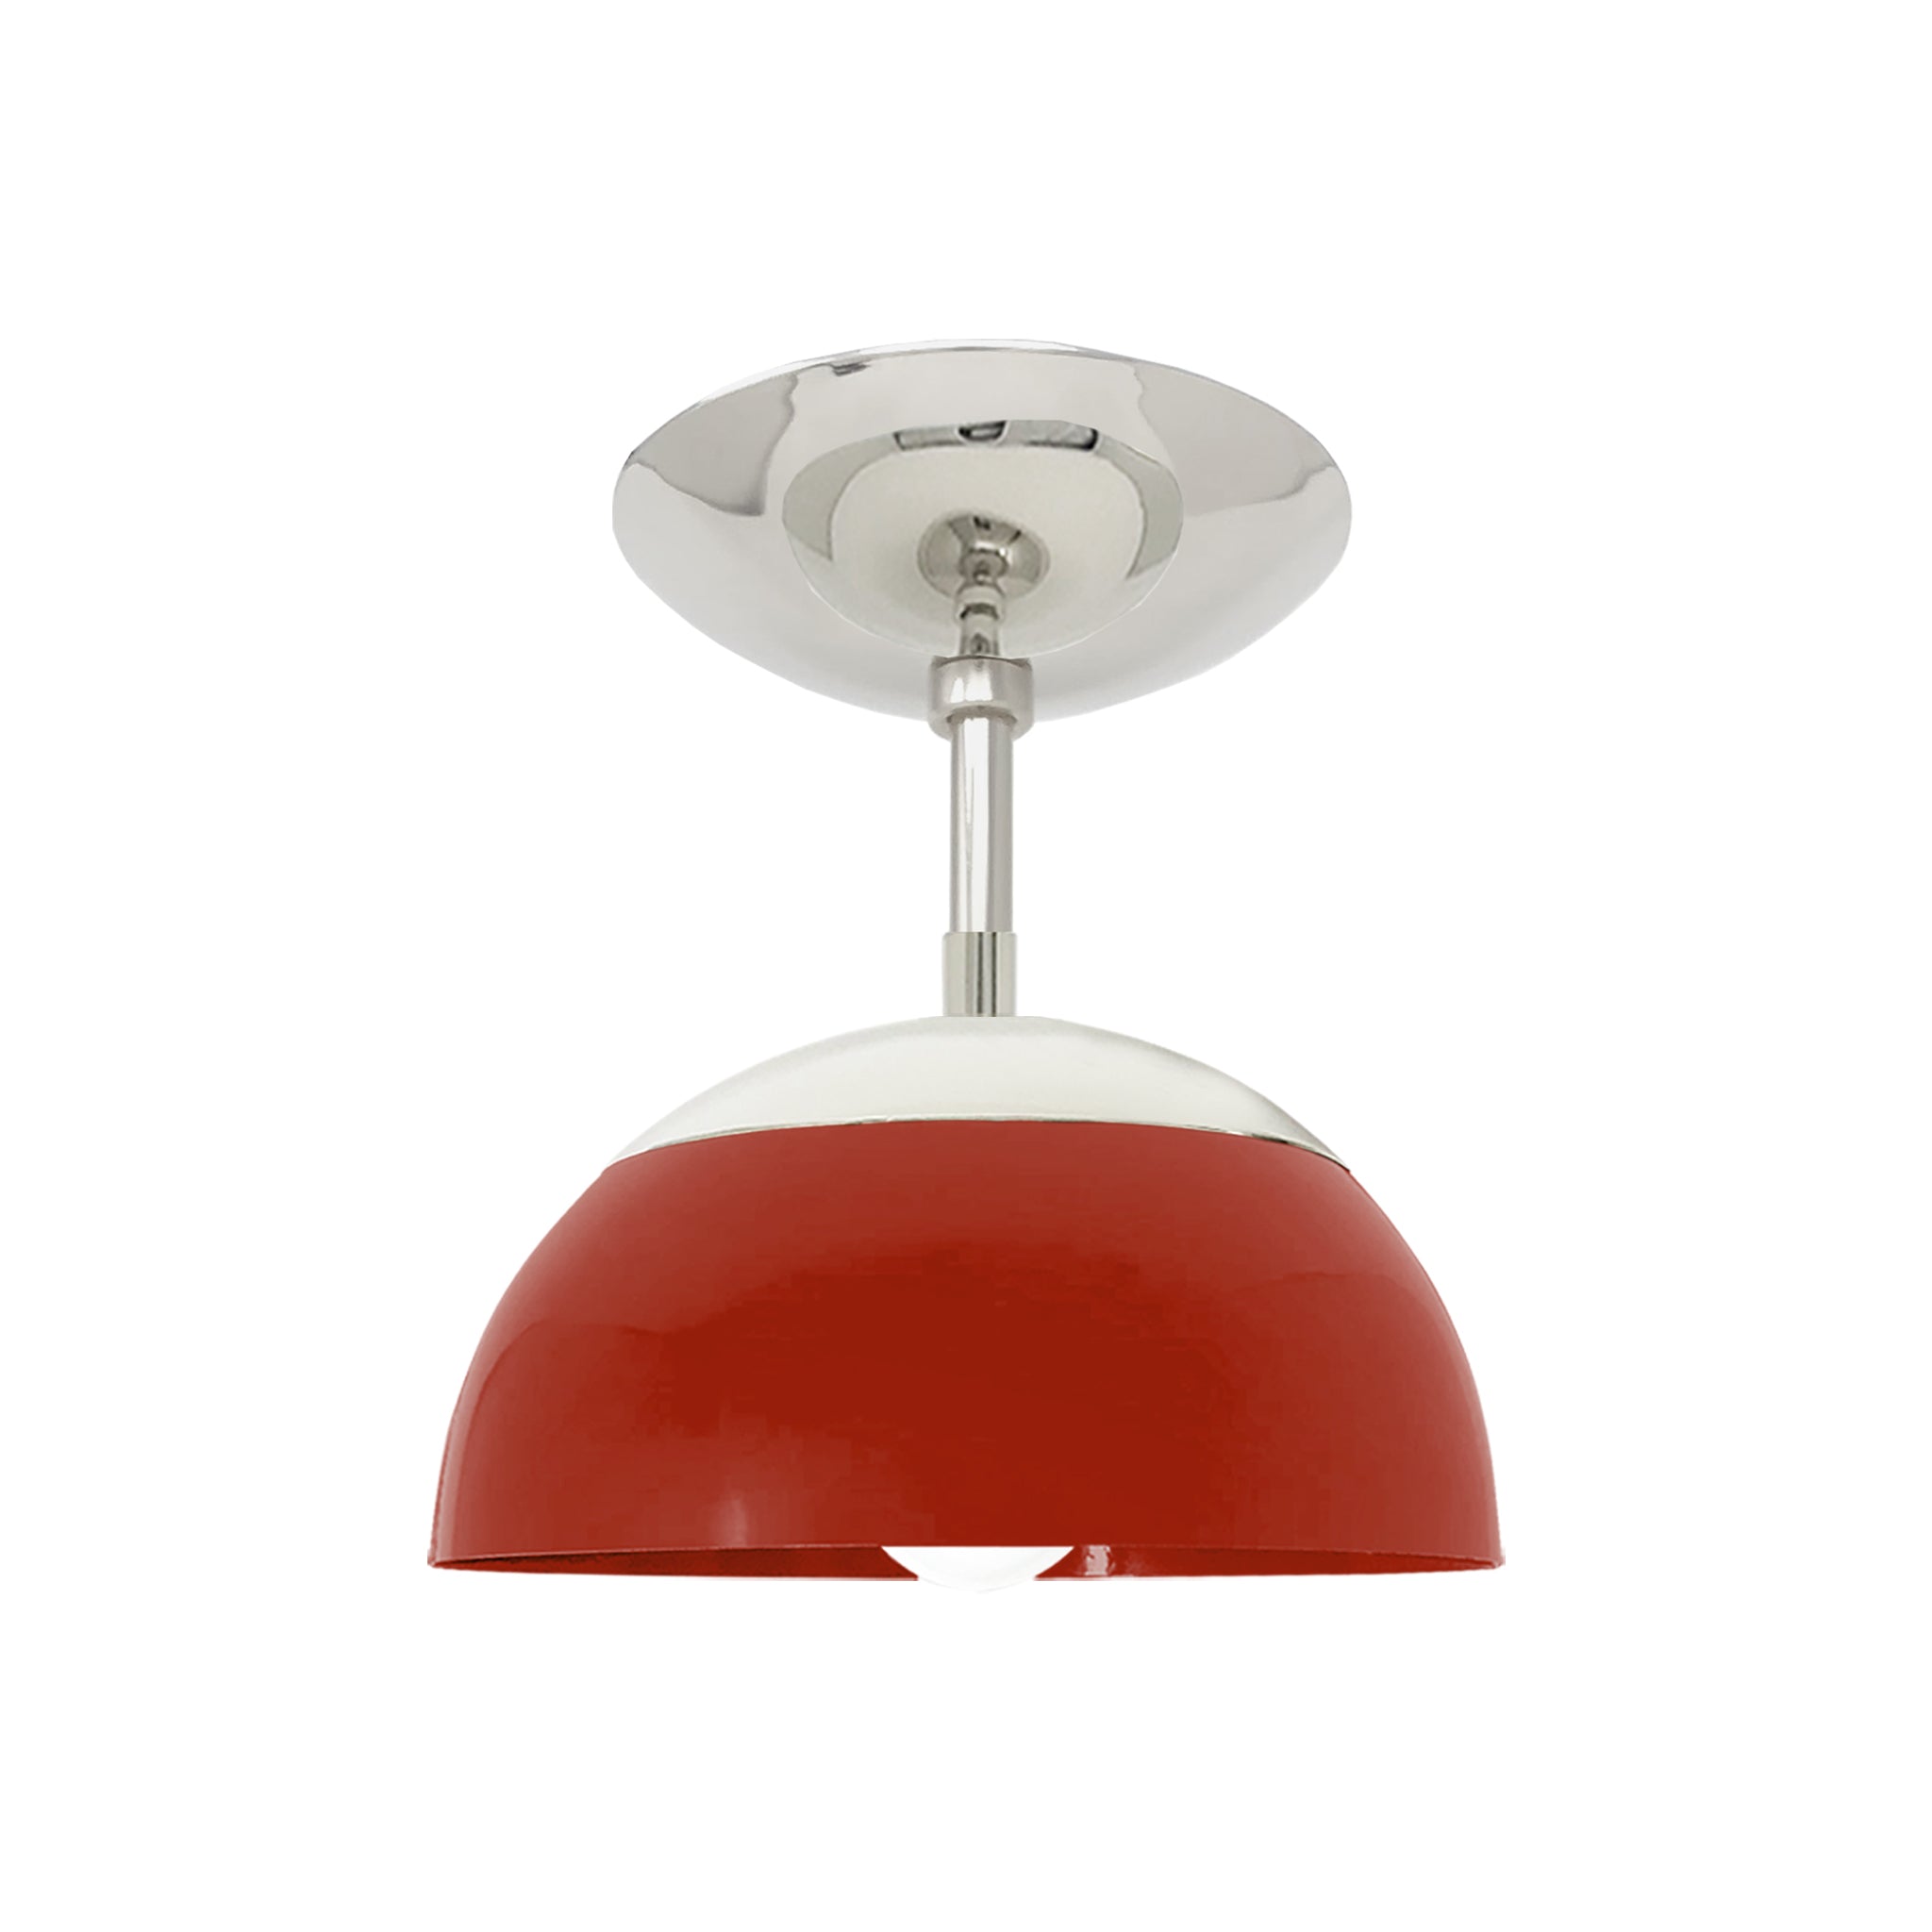 Nickel and riding hood red color Cadbury flush mount 8" Dutton Brown lighting